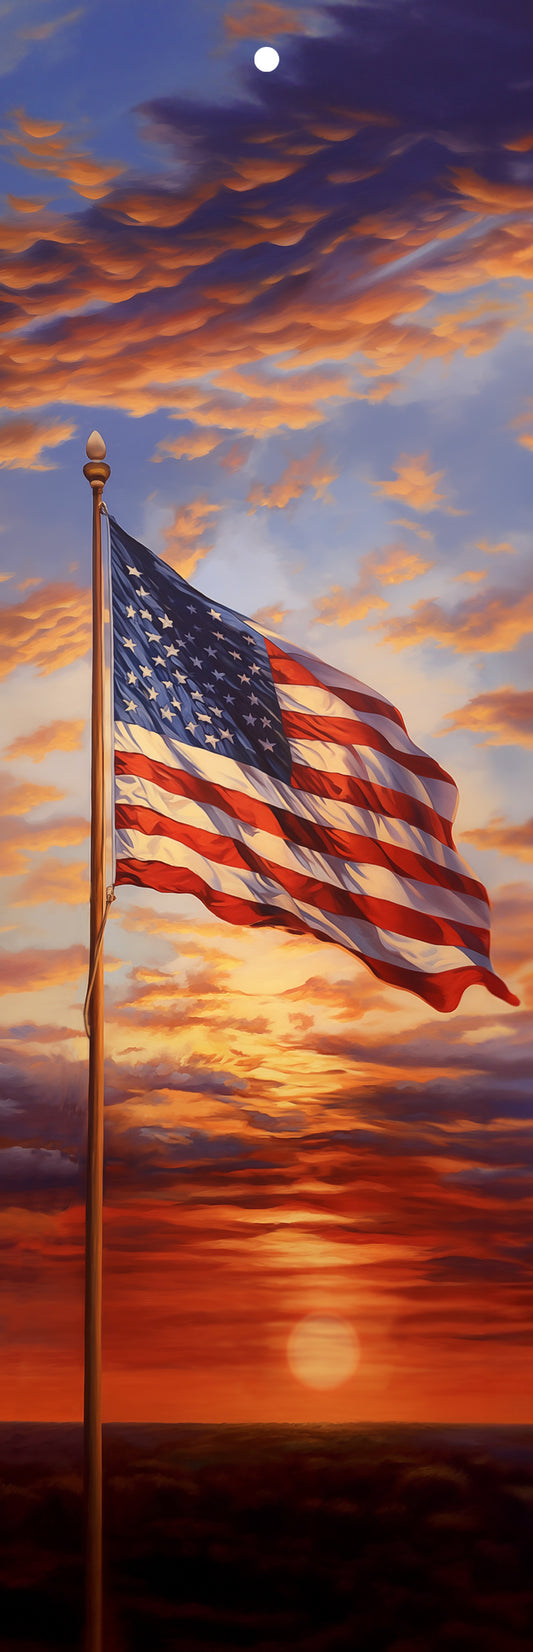 United States of American Flag Sunset